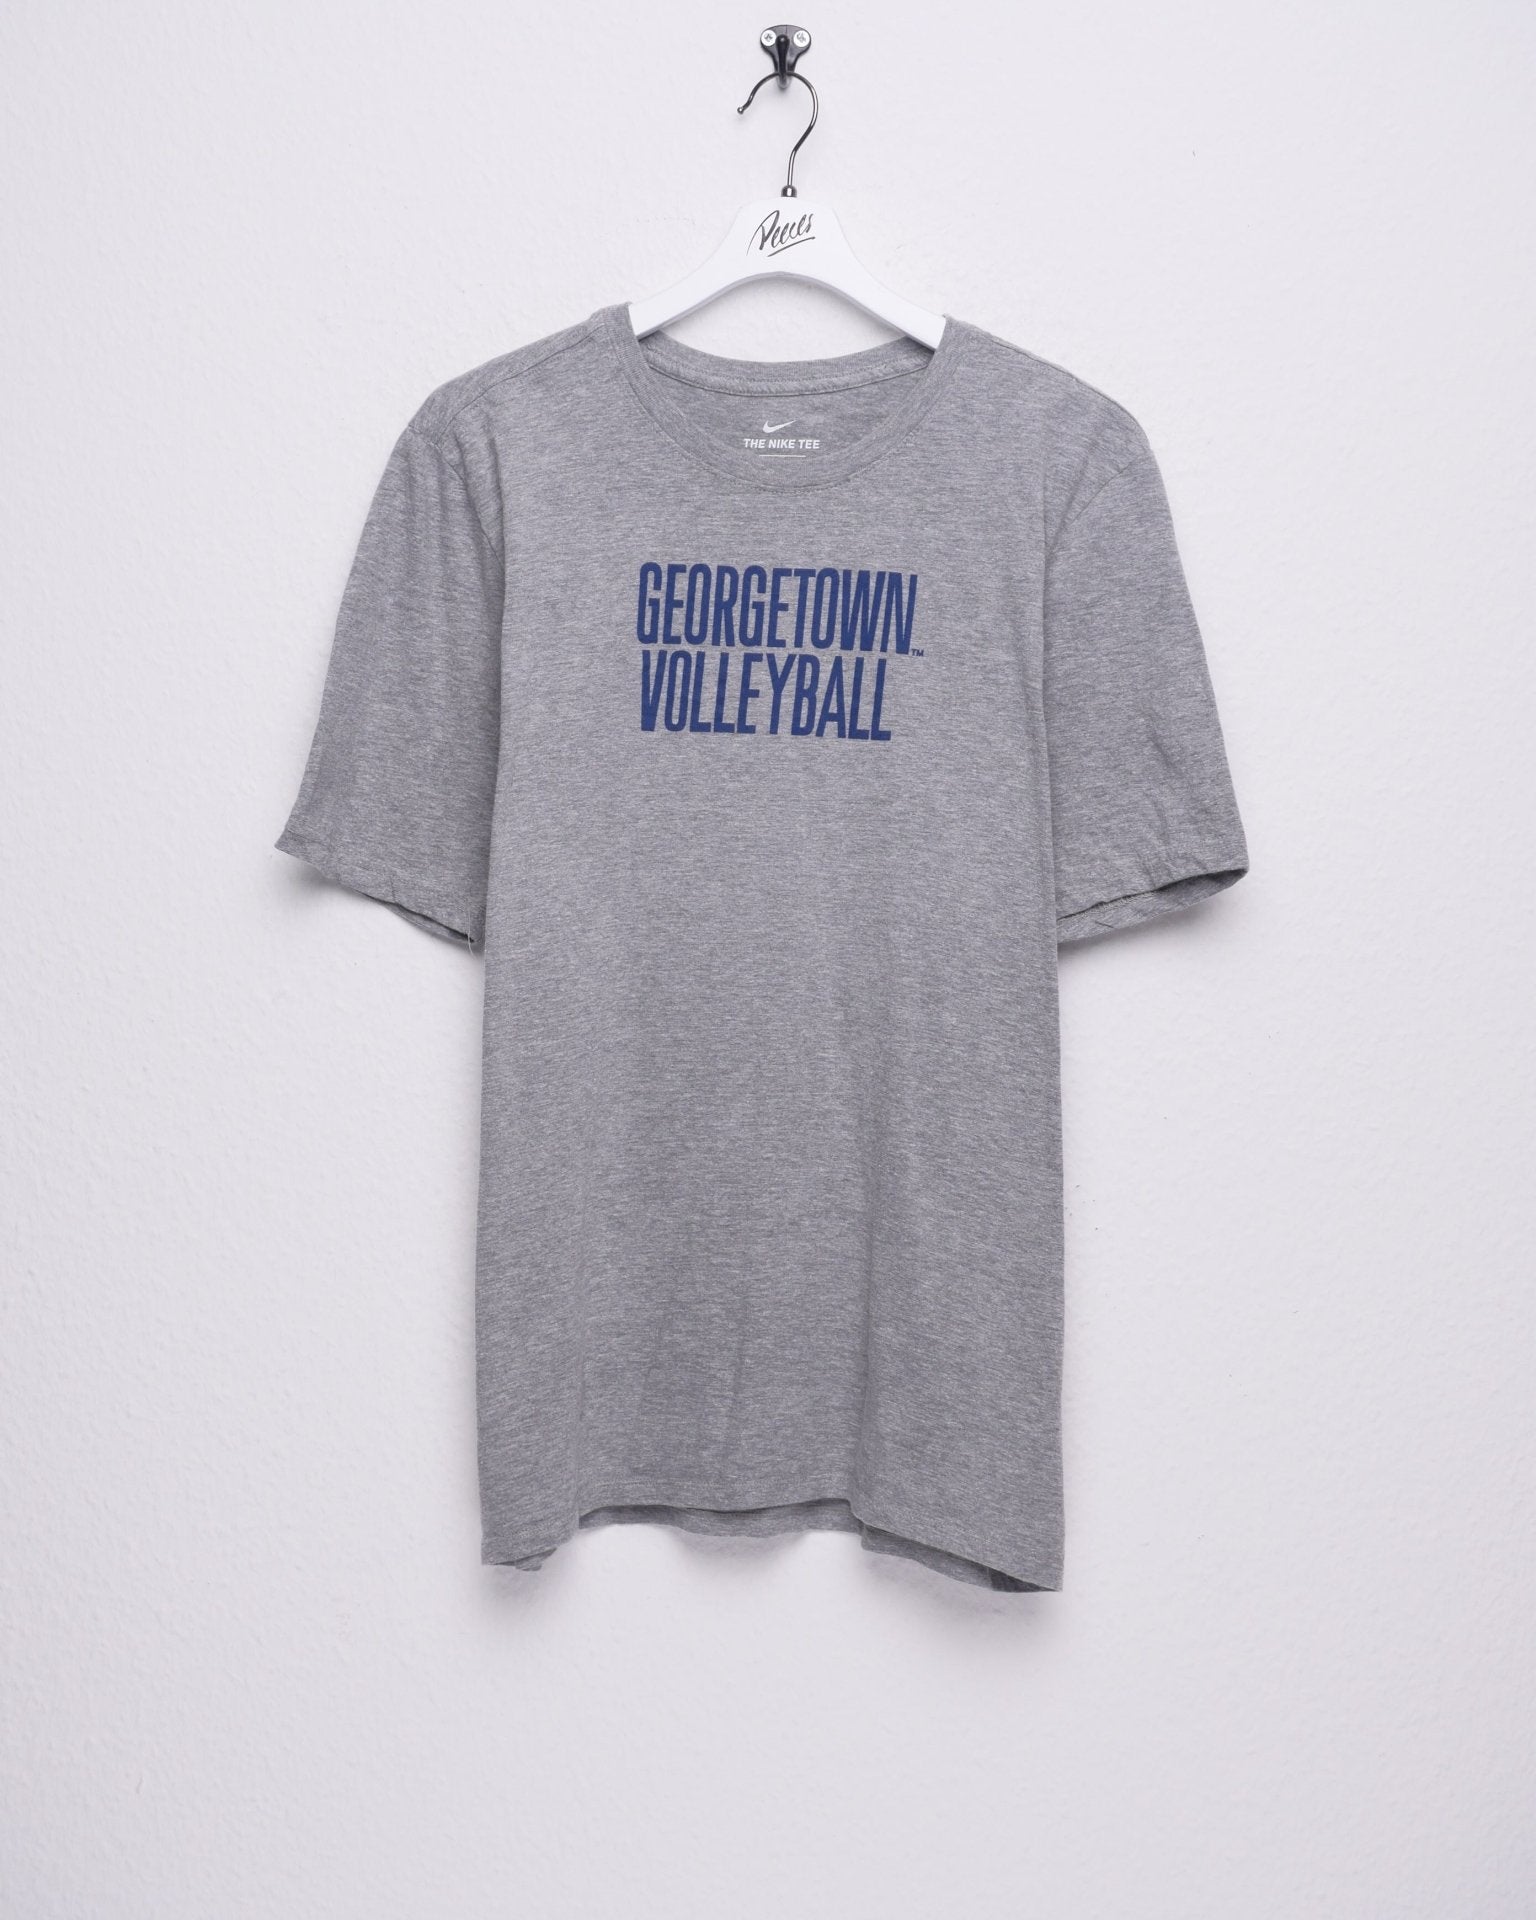 Nike Georgetown Volleyball printed grey Shirt - Peeces